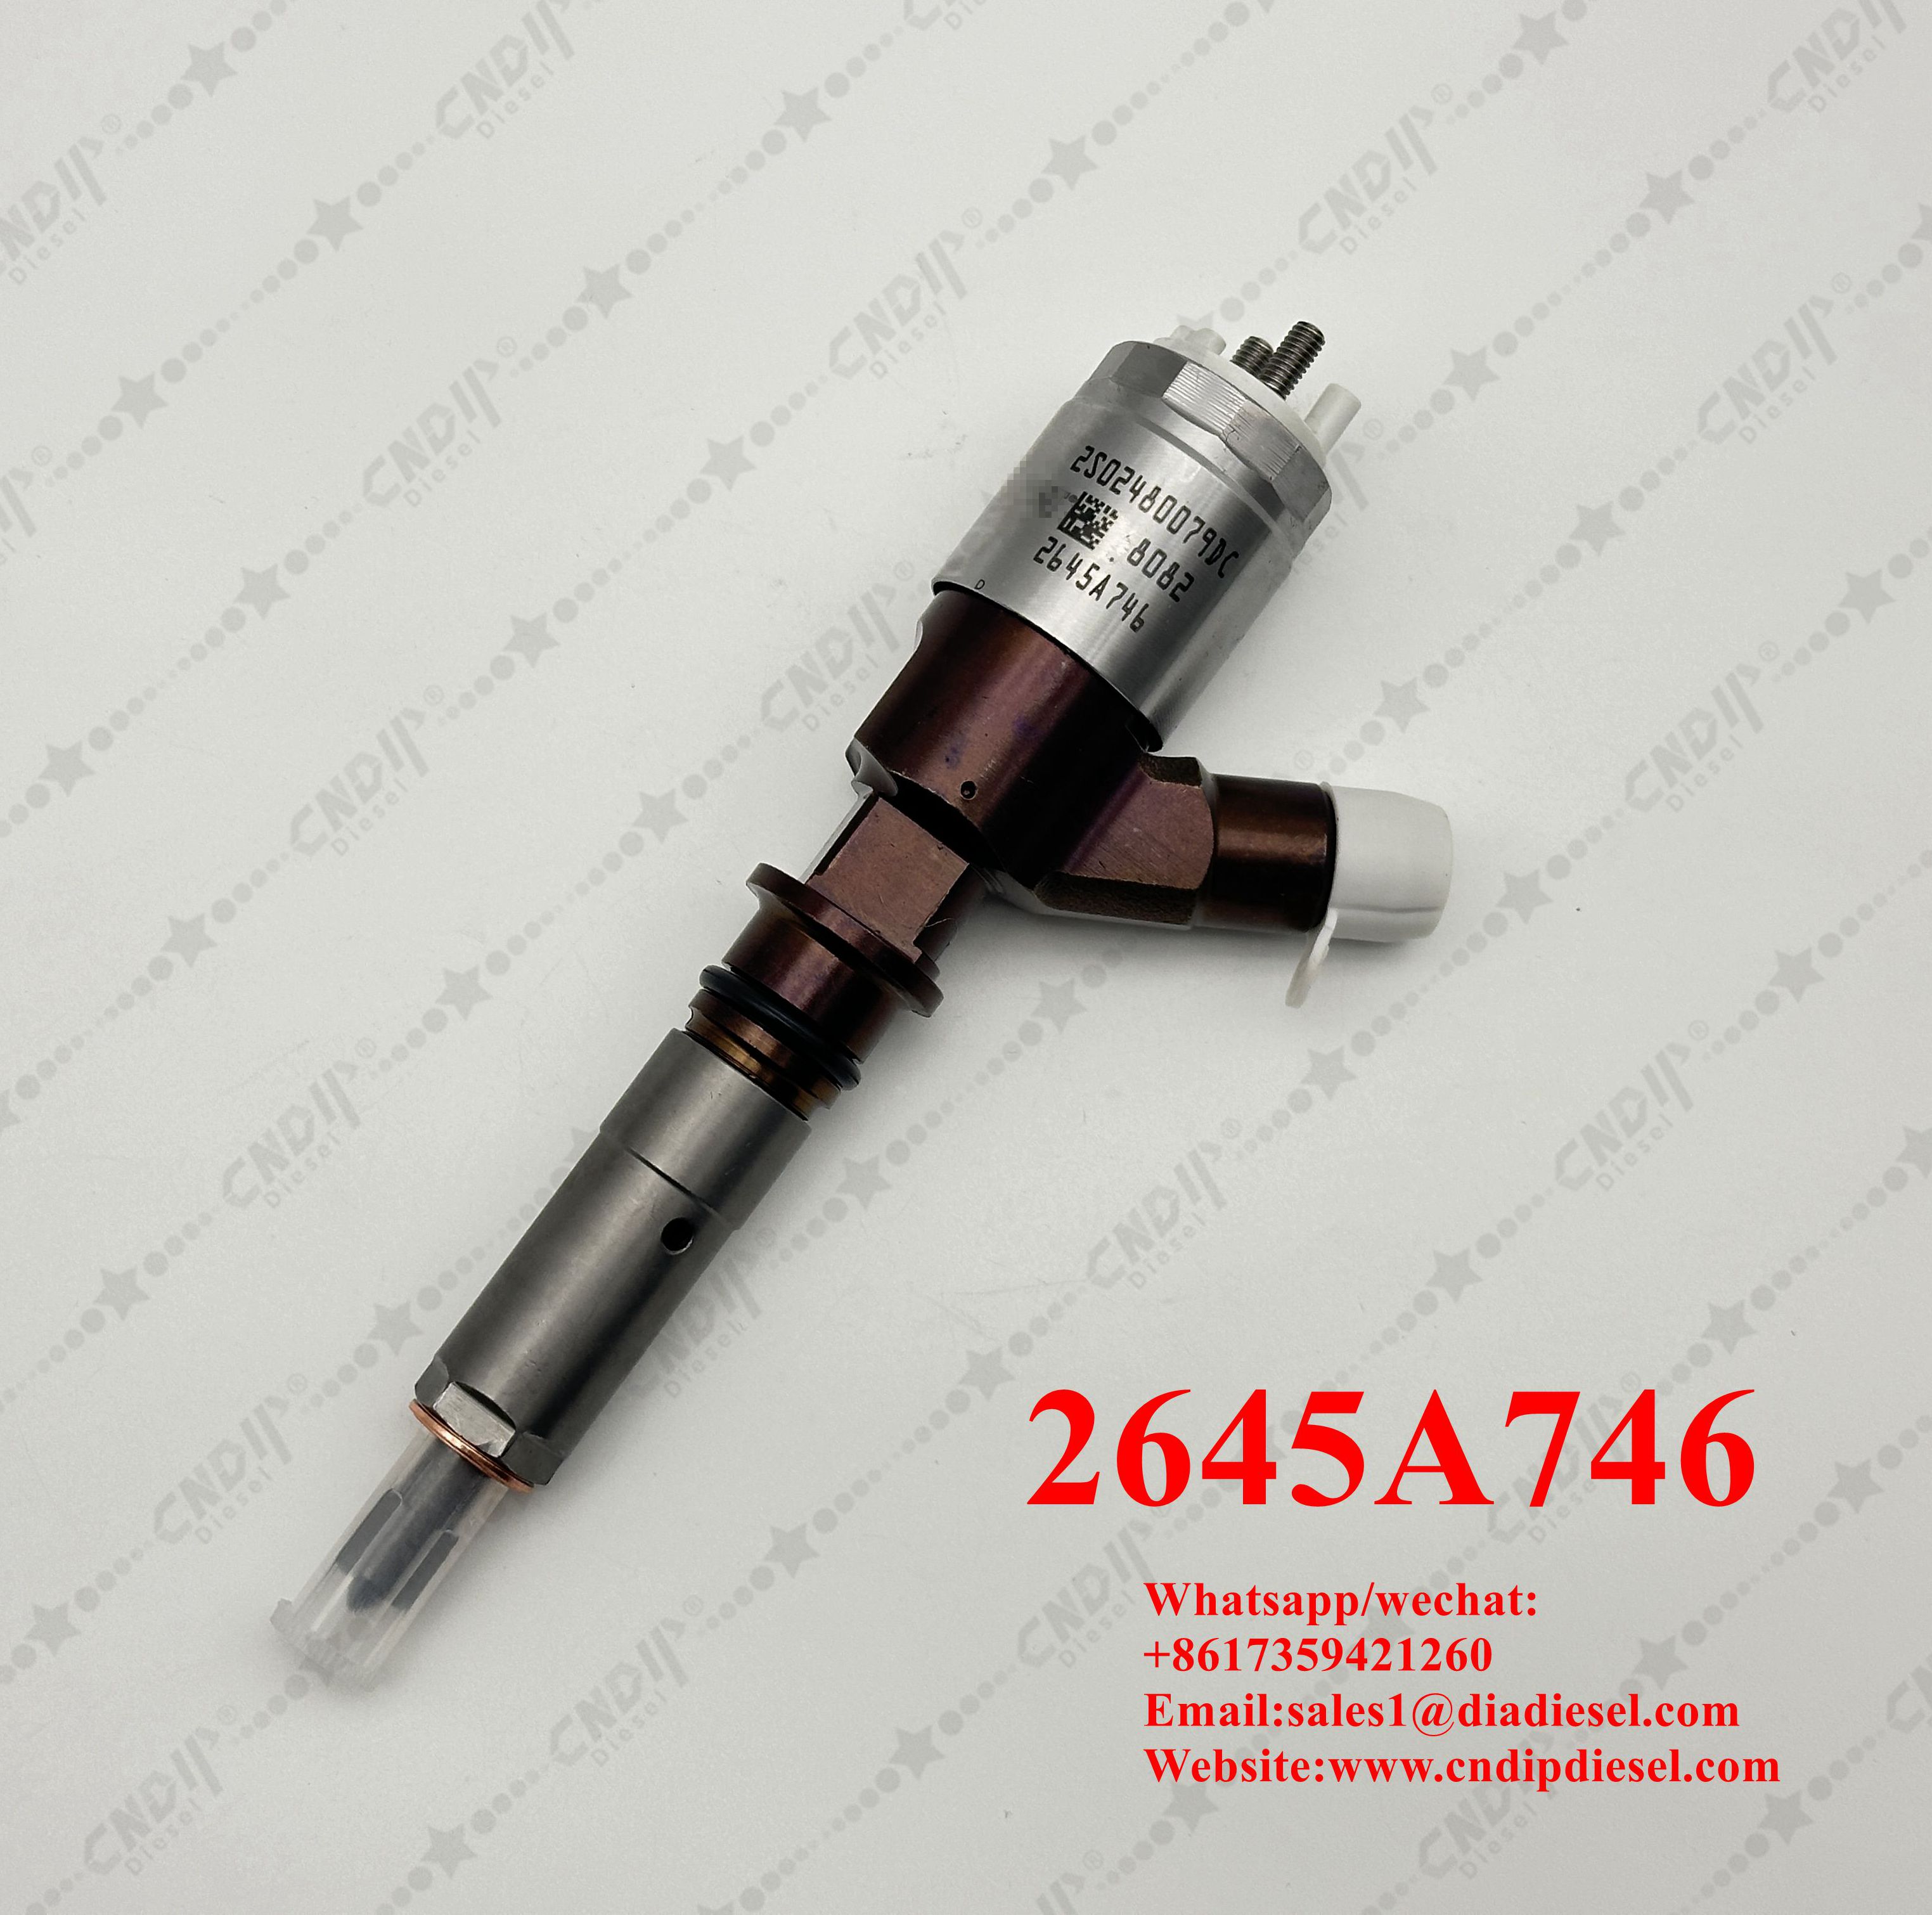 High Performance Diesel Fuel Perkins Injector 2645A746 Injector 320-0677 for Caterpillar C6.6 Engine